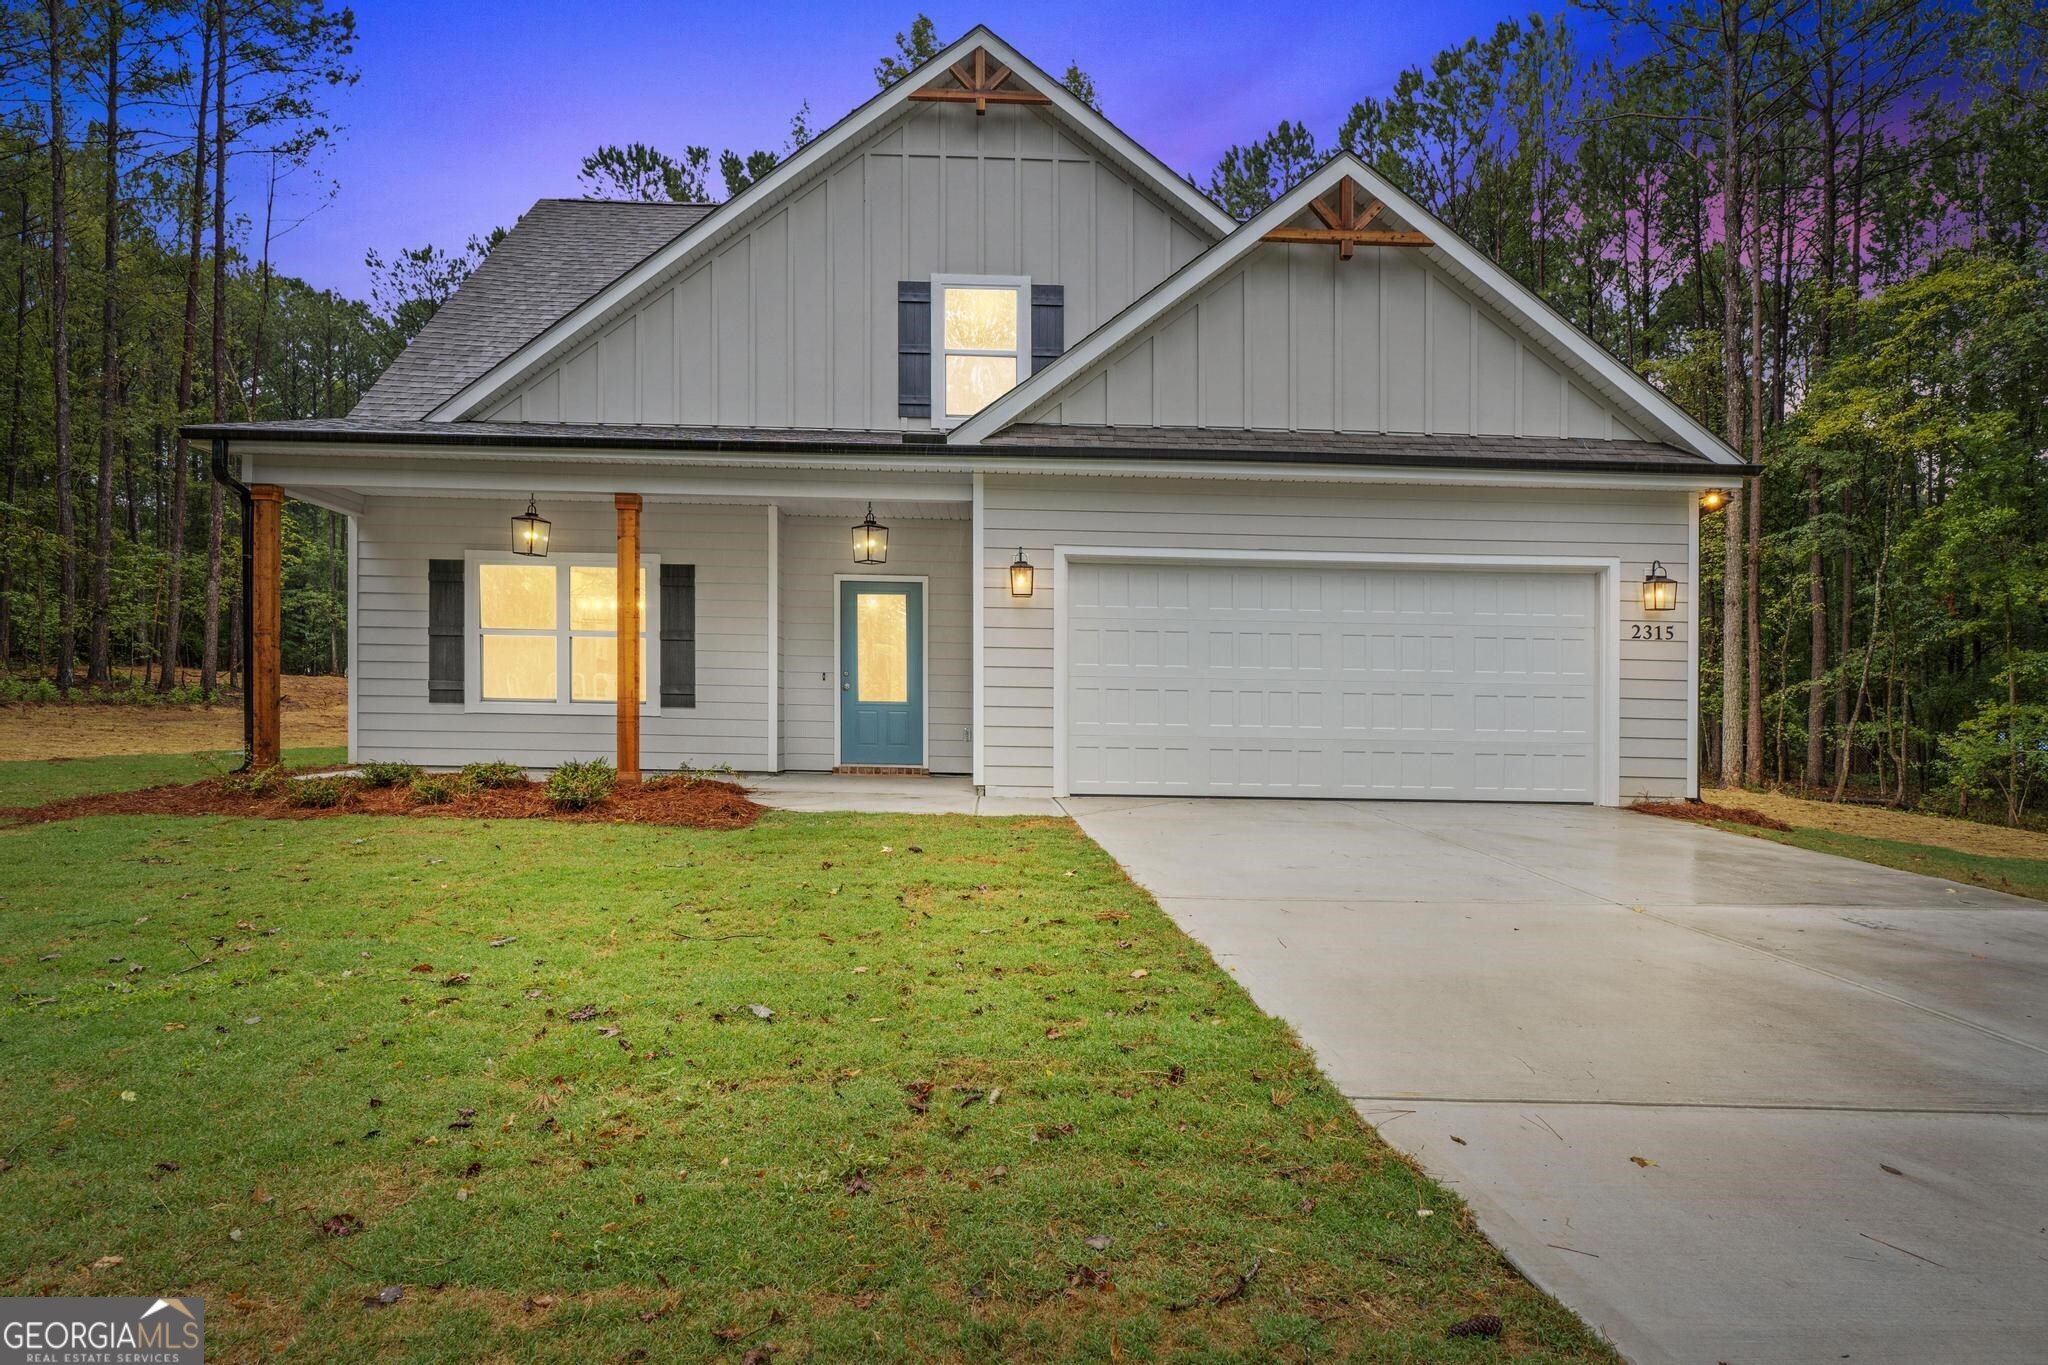 80 West Curtis Road Concord, GA 30206 – Pike County New Construction